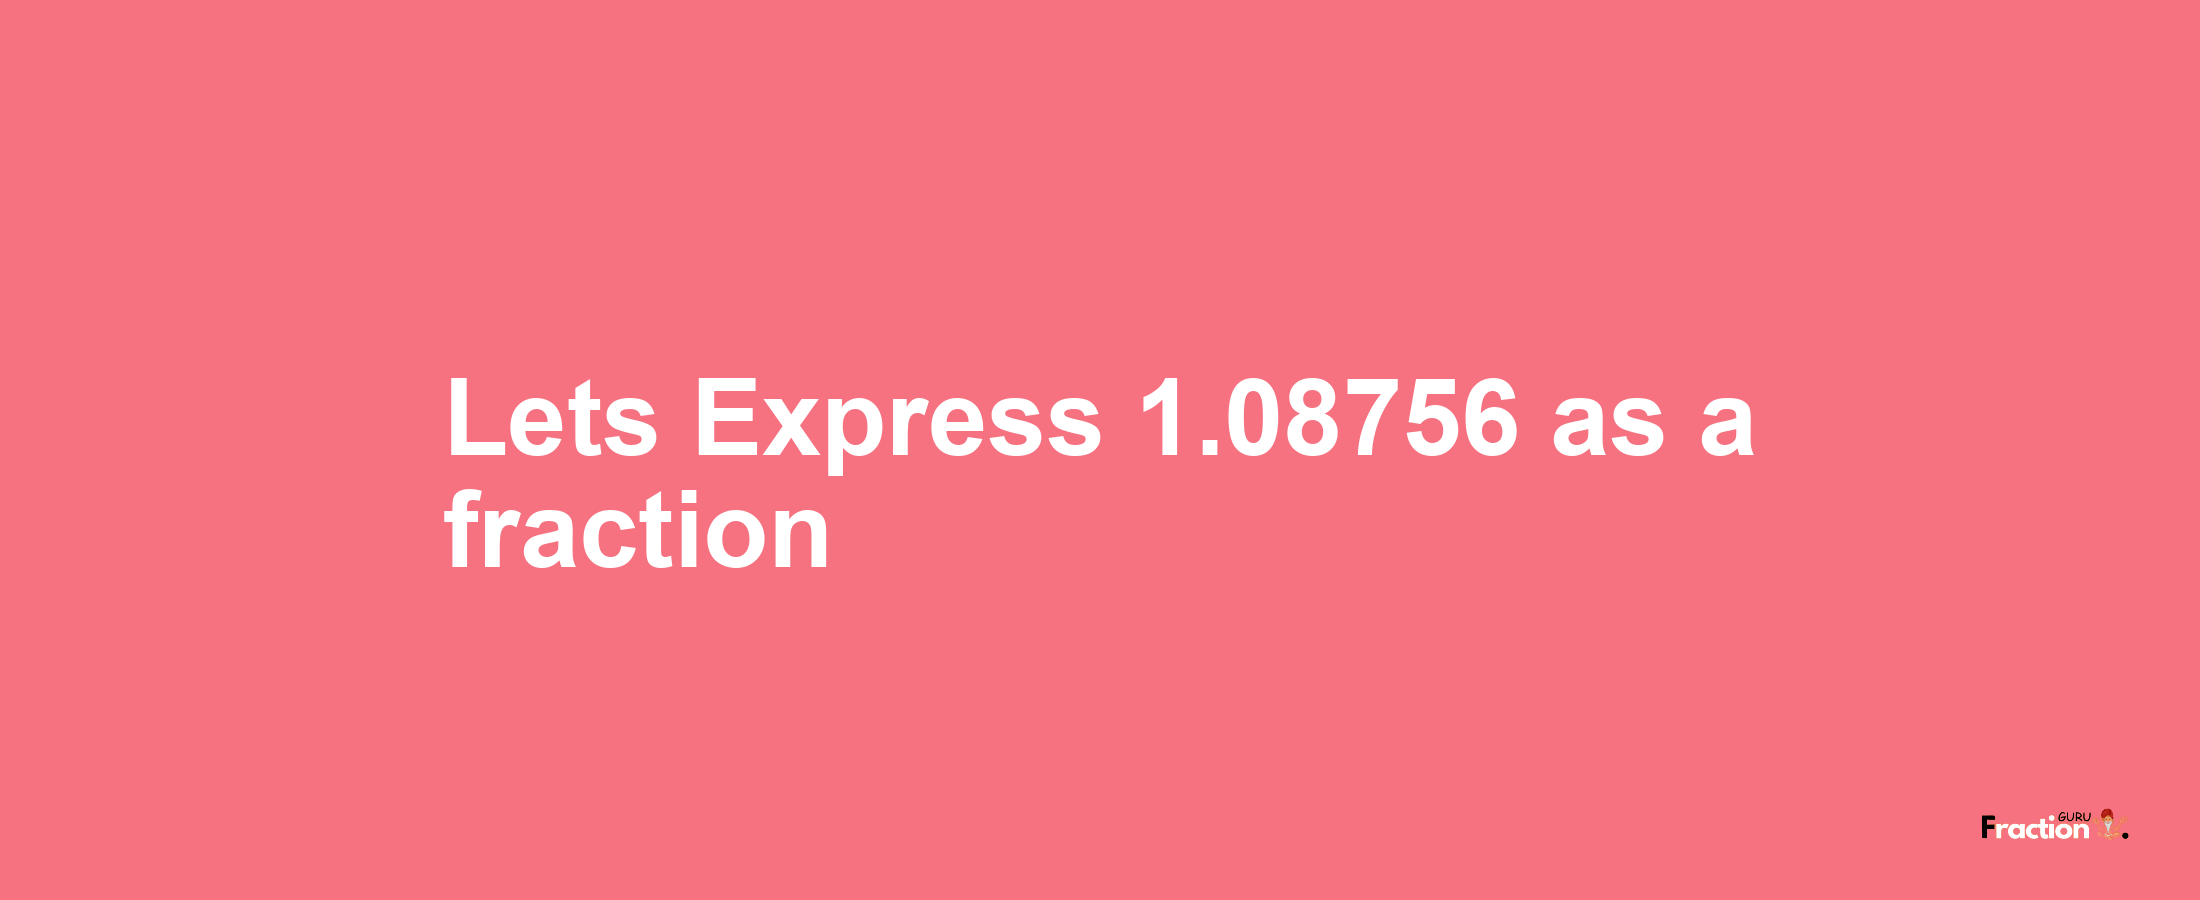 Lets Express 1.08756 as afraction